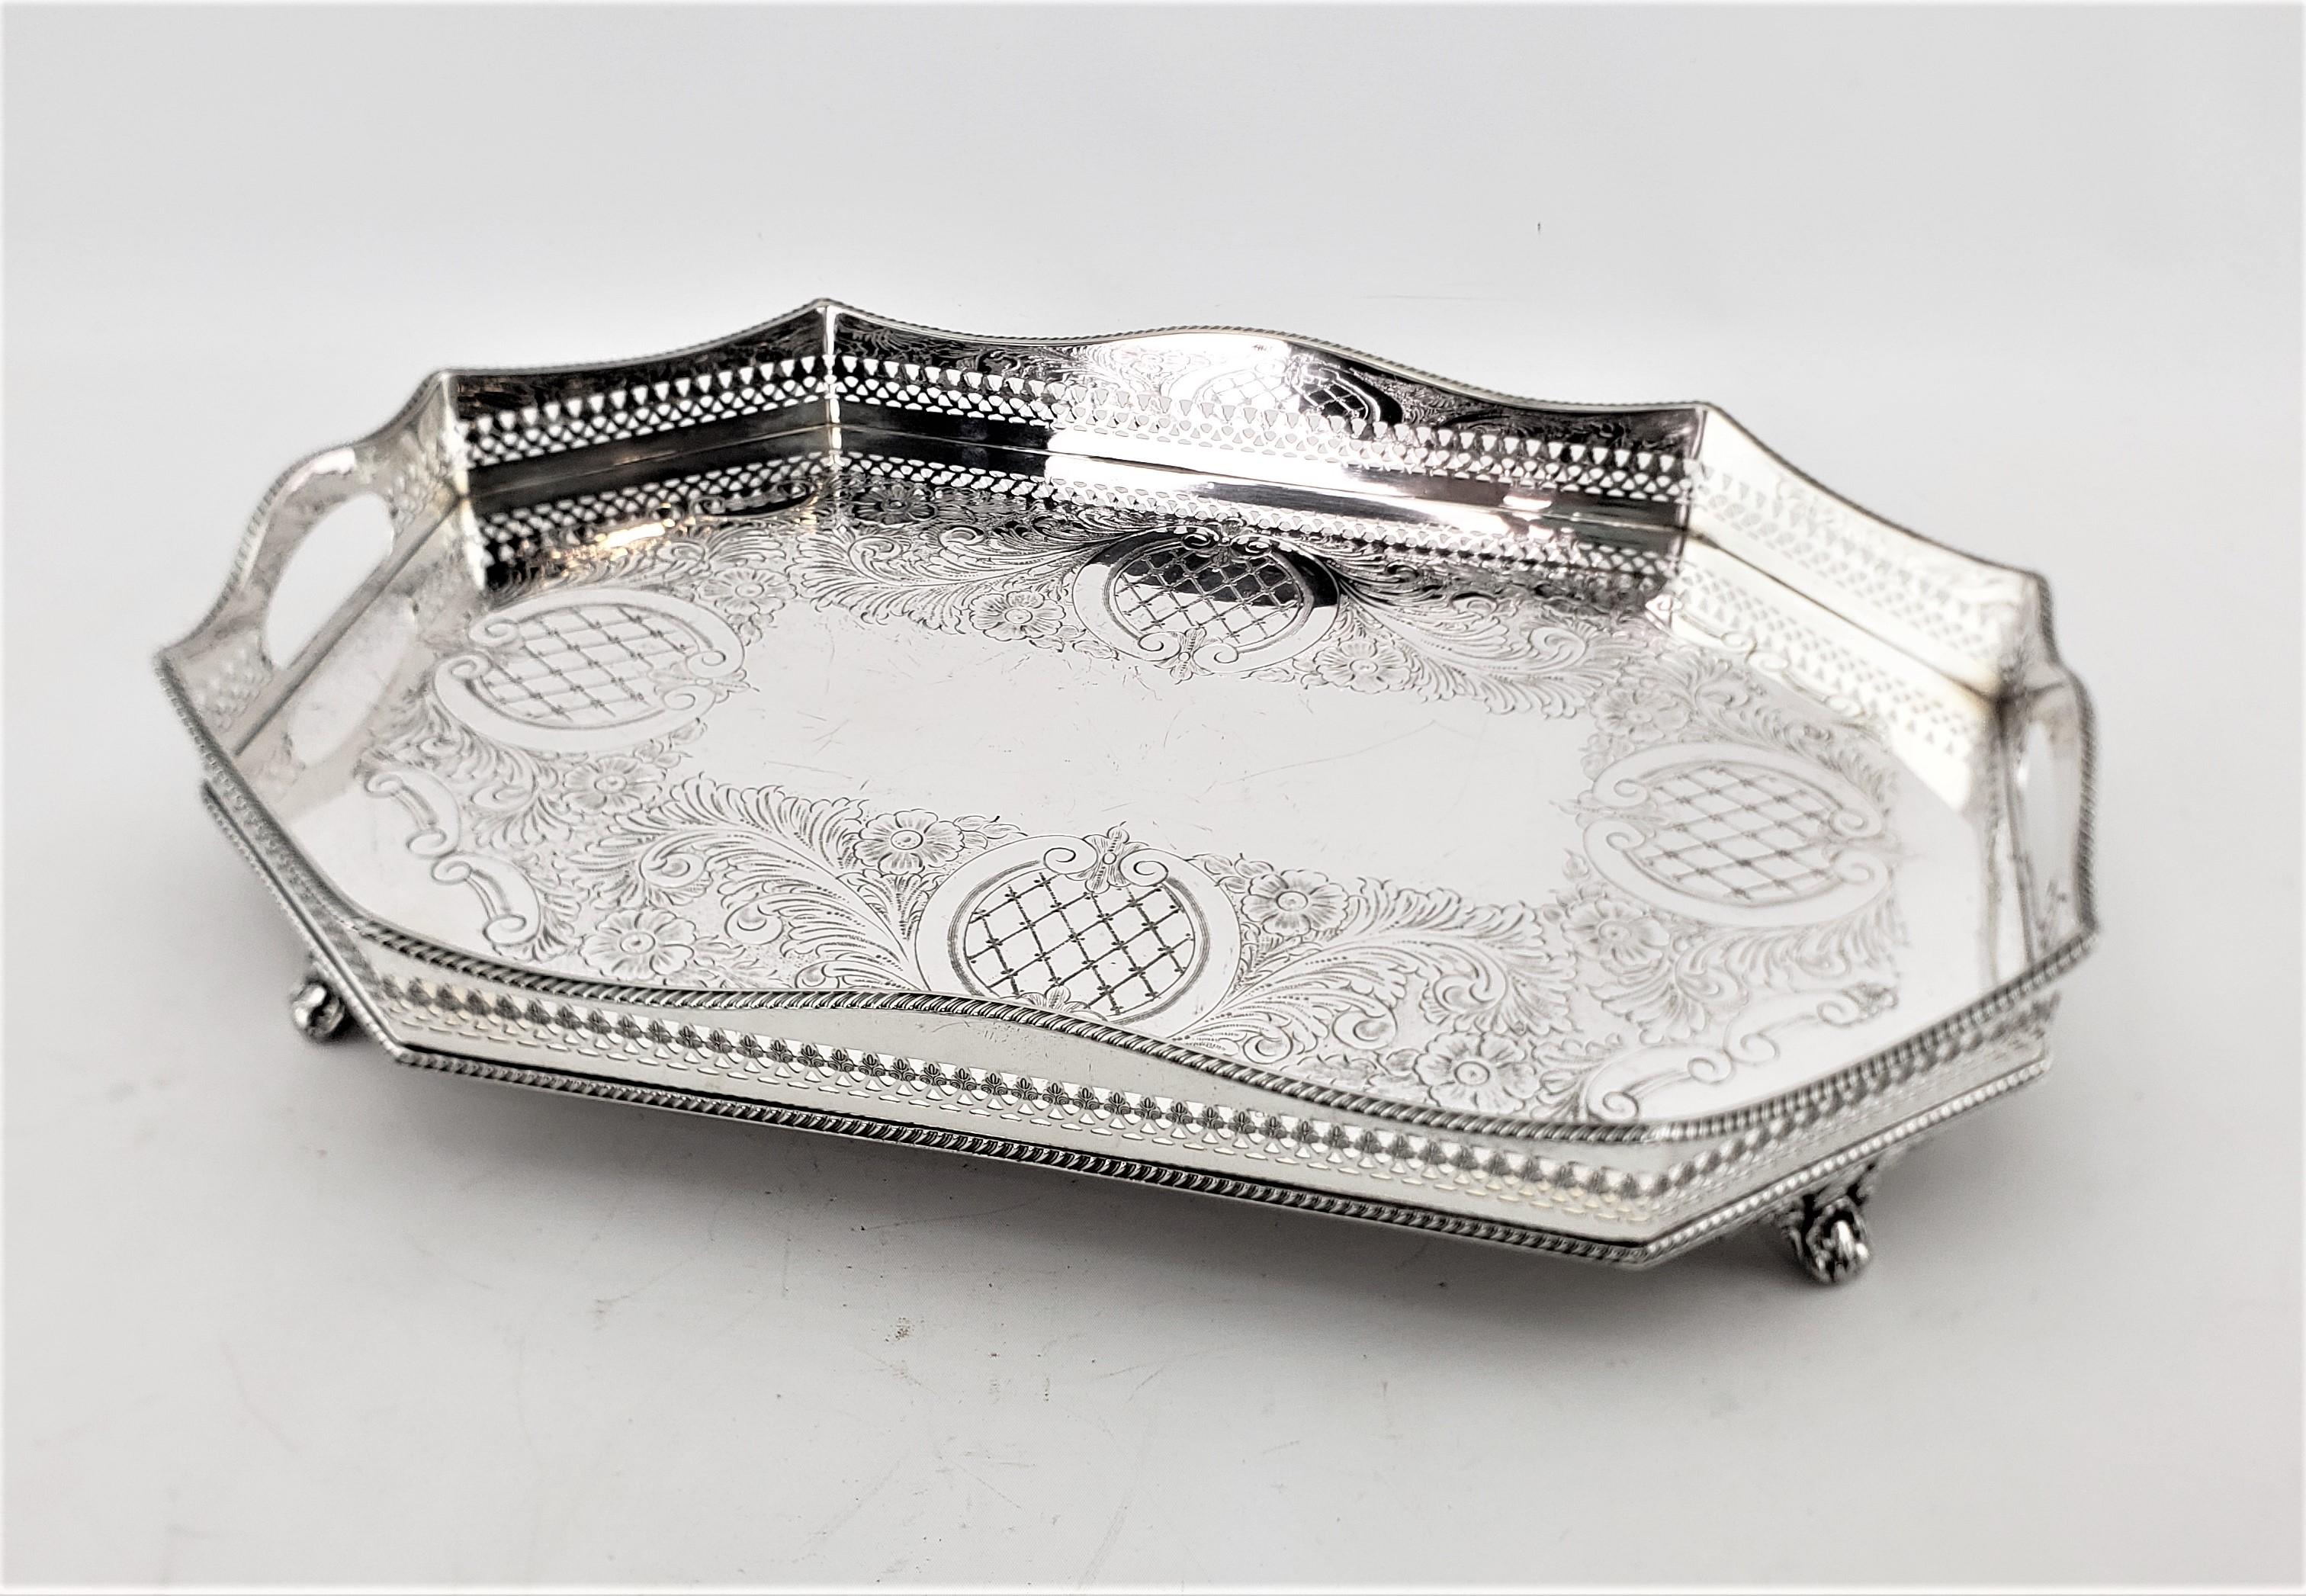 This antique silver plated gallery serving tray was made by the Legacy Plate Co. of England in approximately 1900 in a period Edwardian style. This octagonal silver plated tray is nicely engraved with four cross hatched medallions, accented by